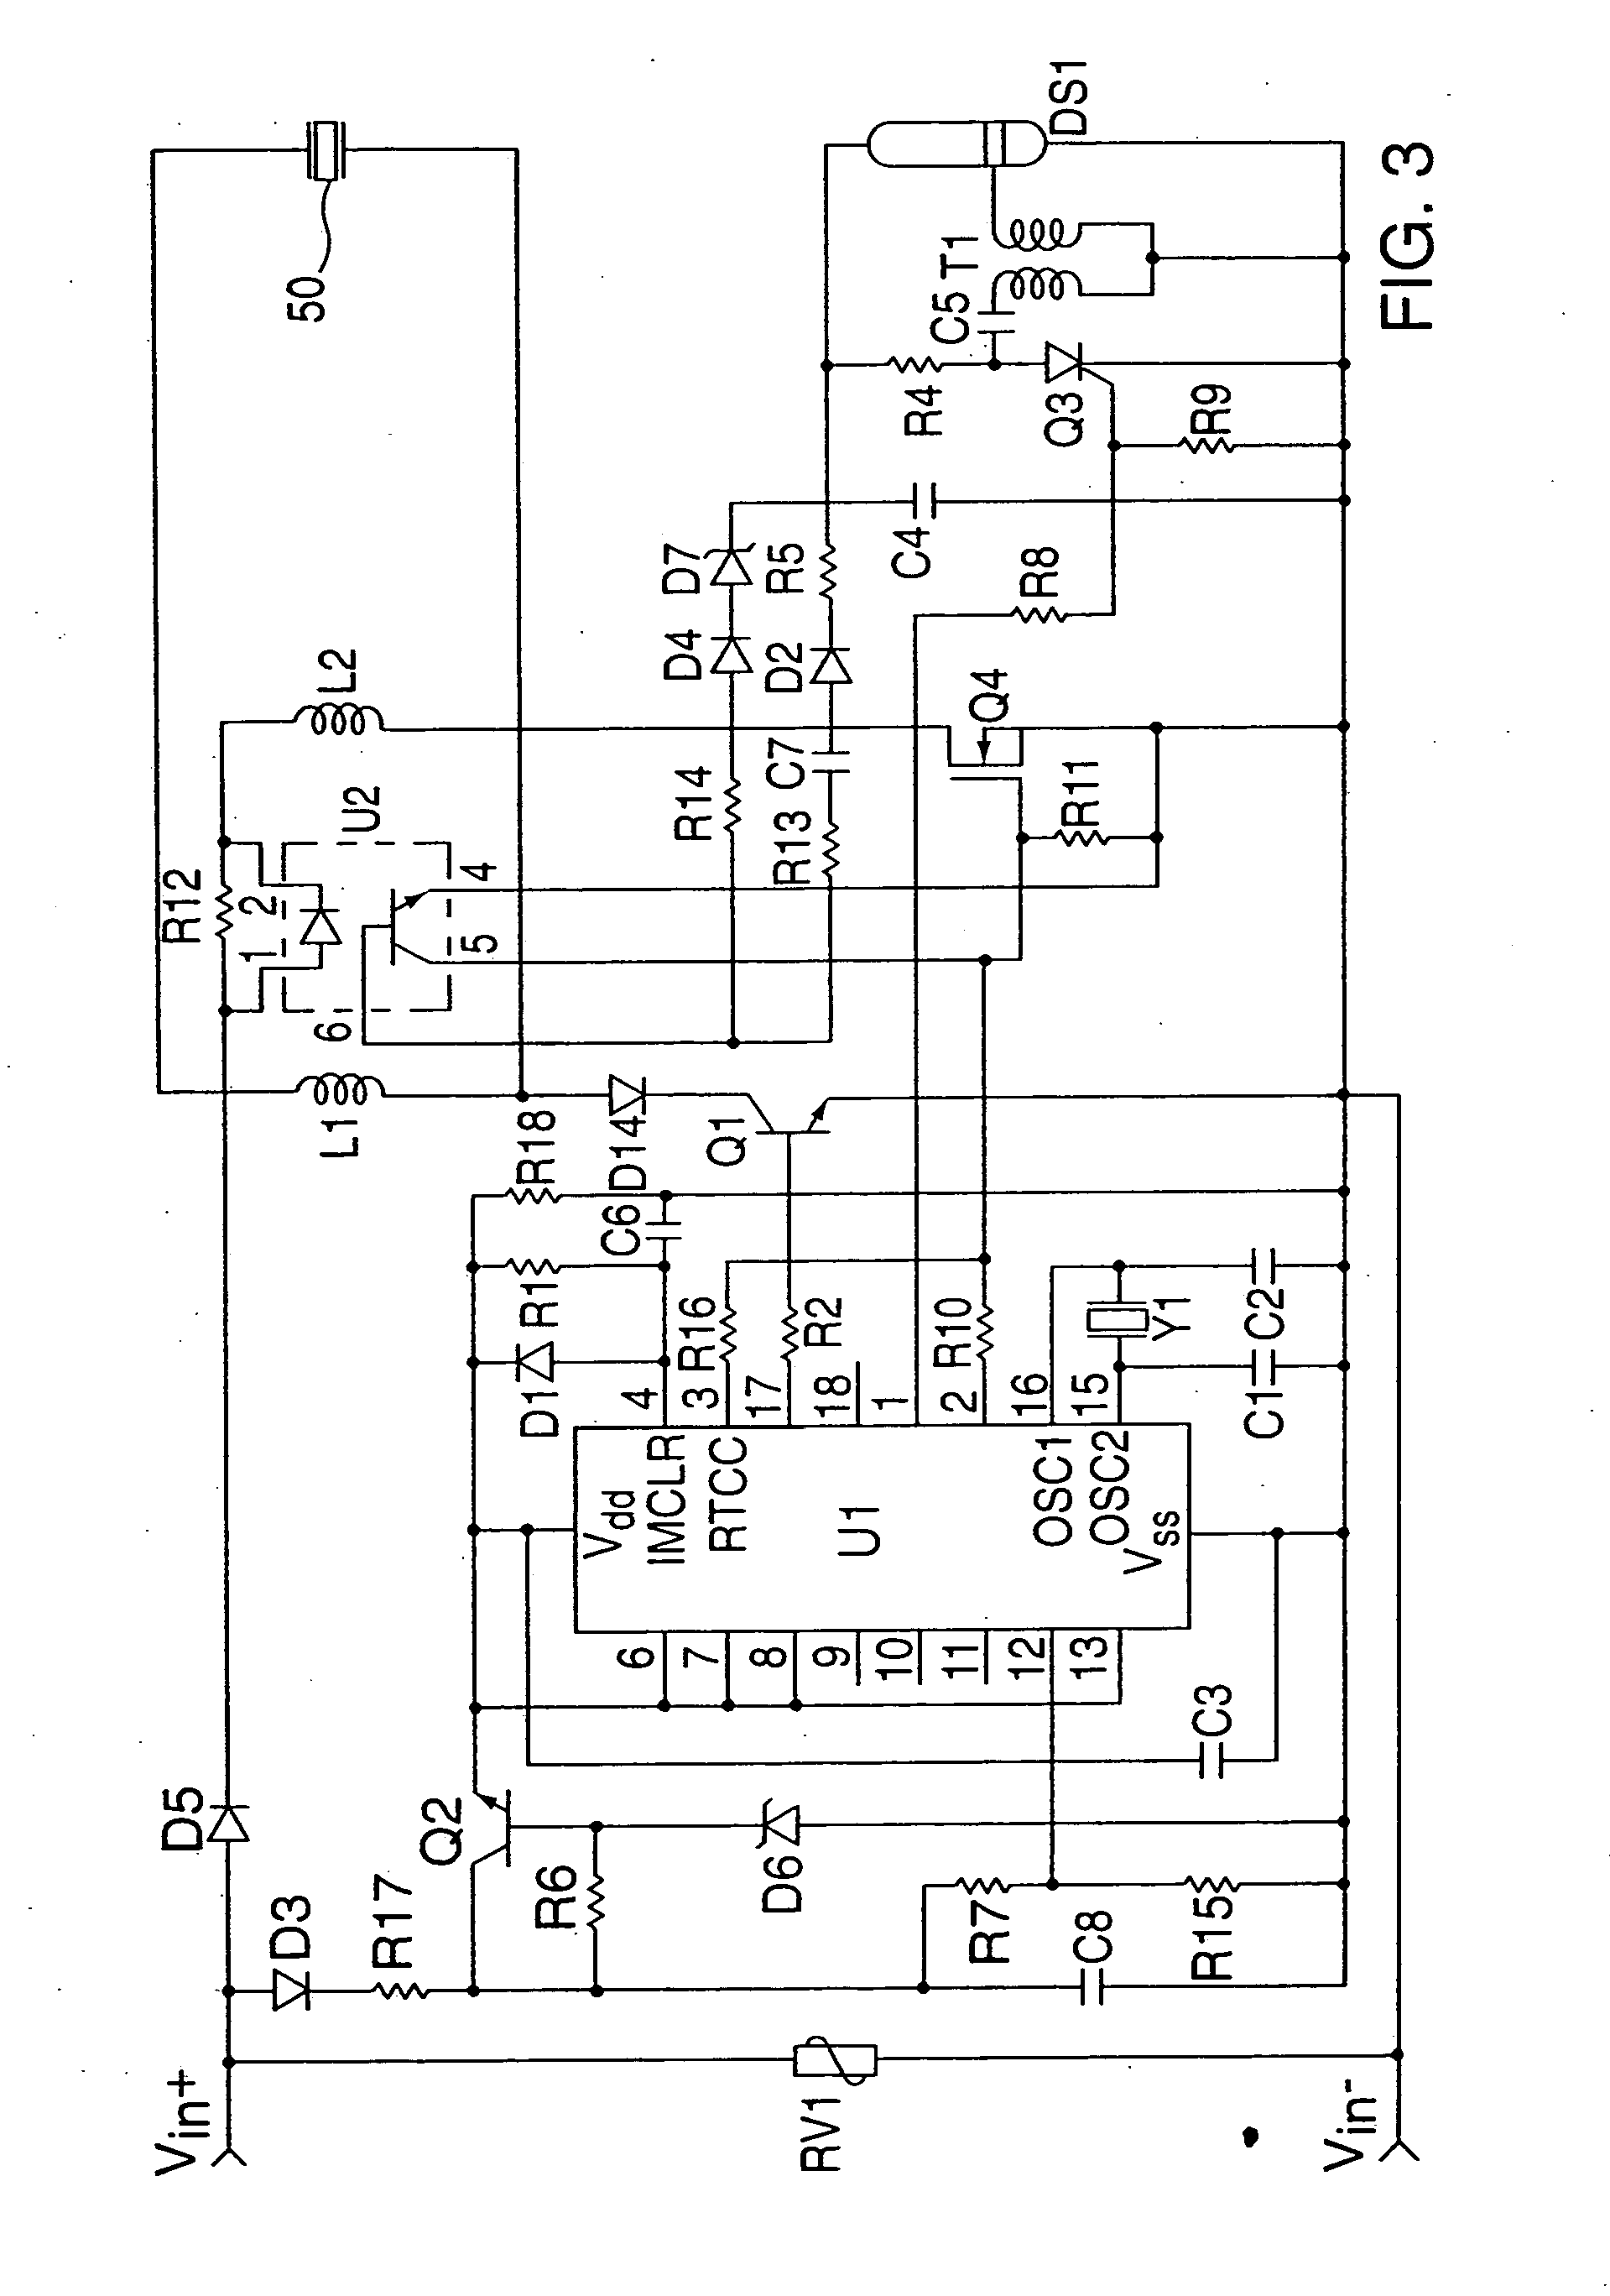 Apparatus and method for synchronizing visual/audible alarm units in an alarm system